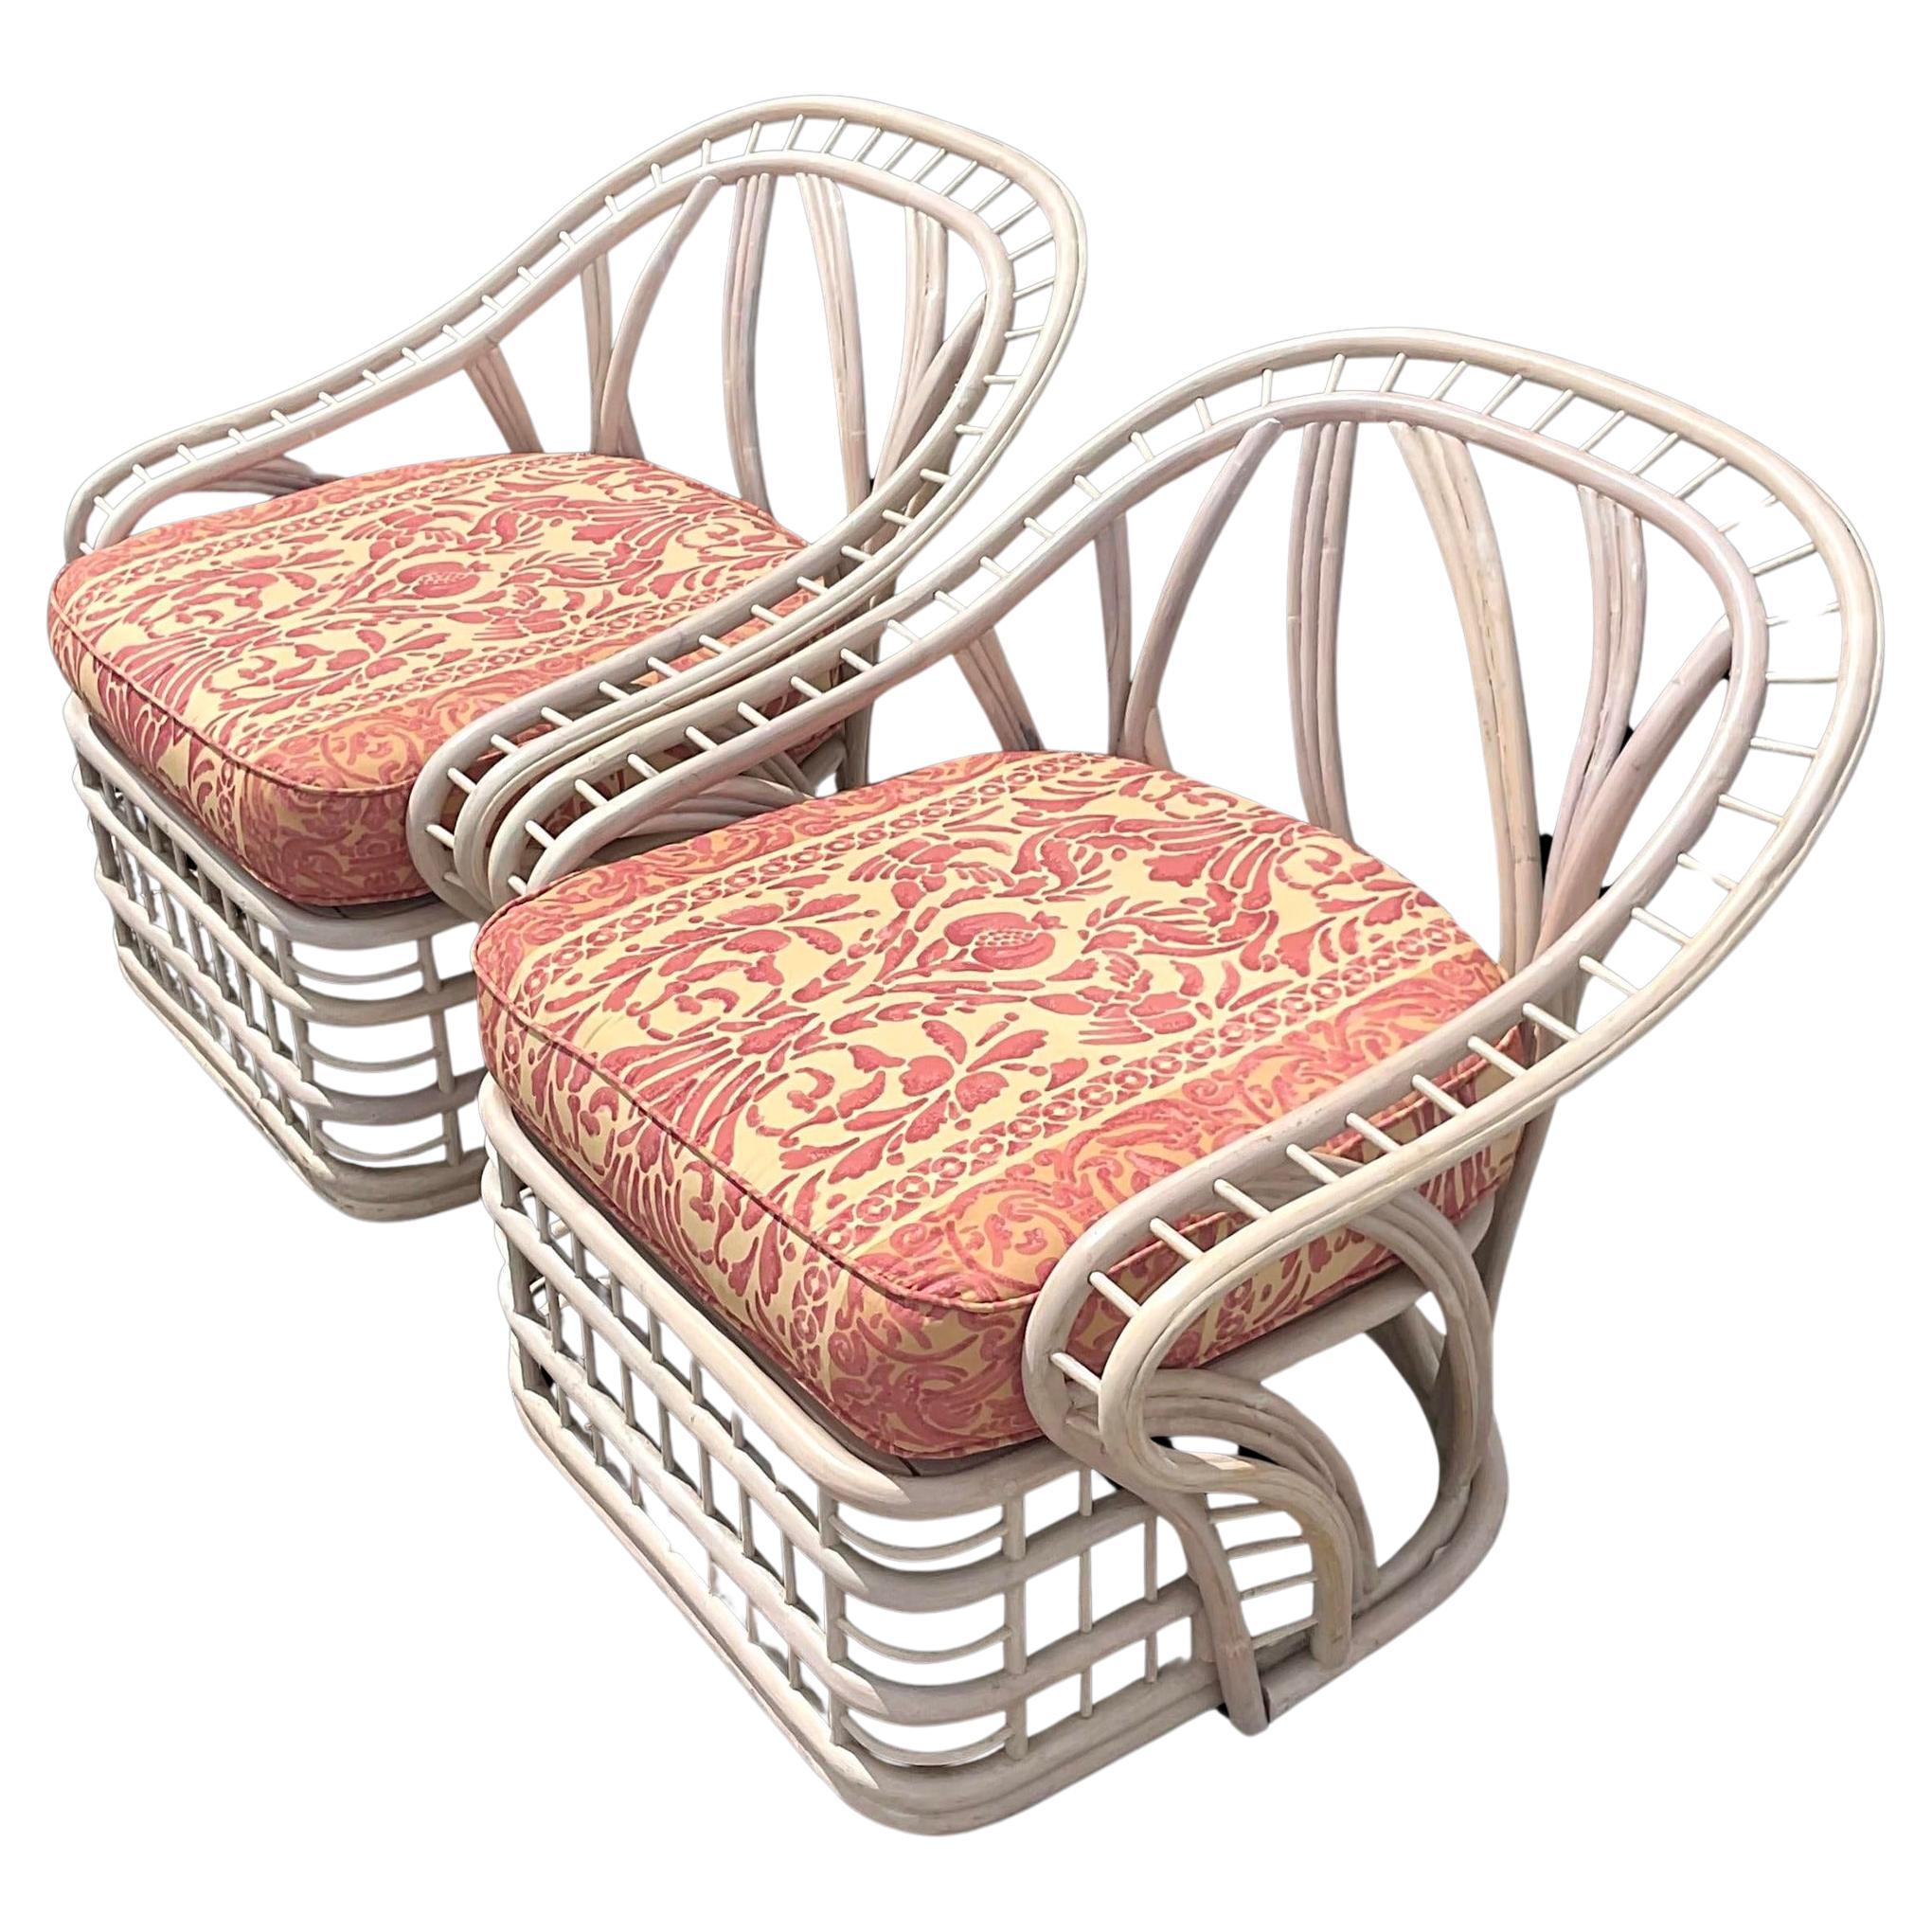 Vintage Coastal Cerused Rattan Lounge Chairs - a Pair For Sale